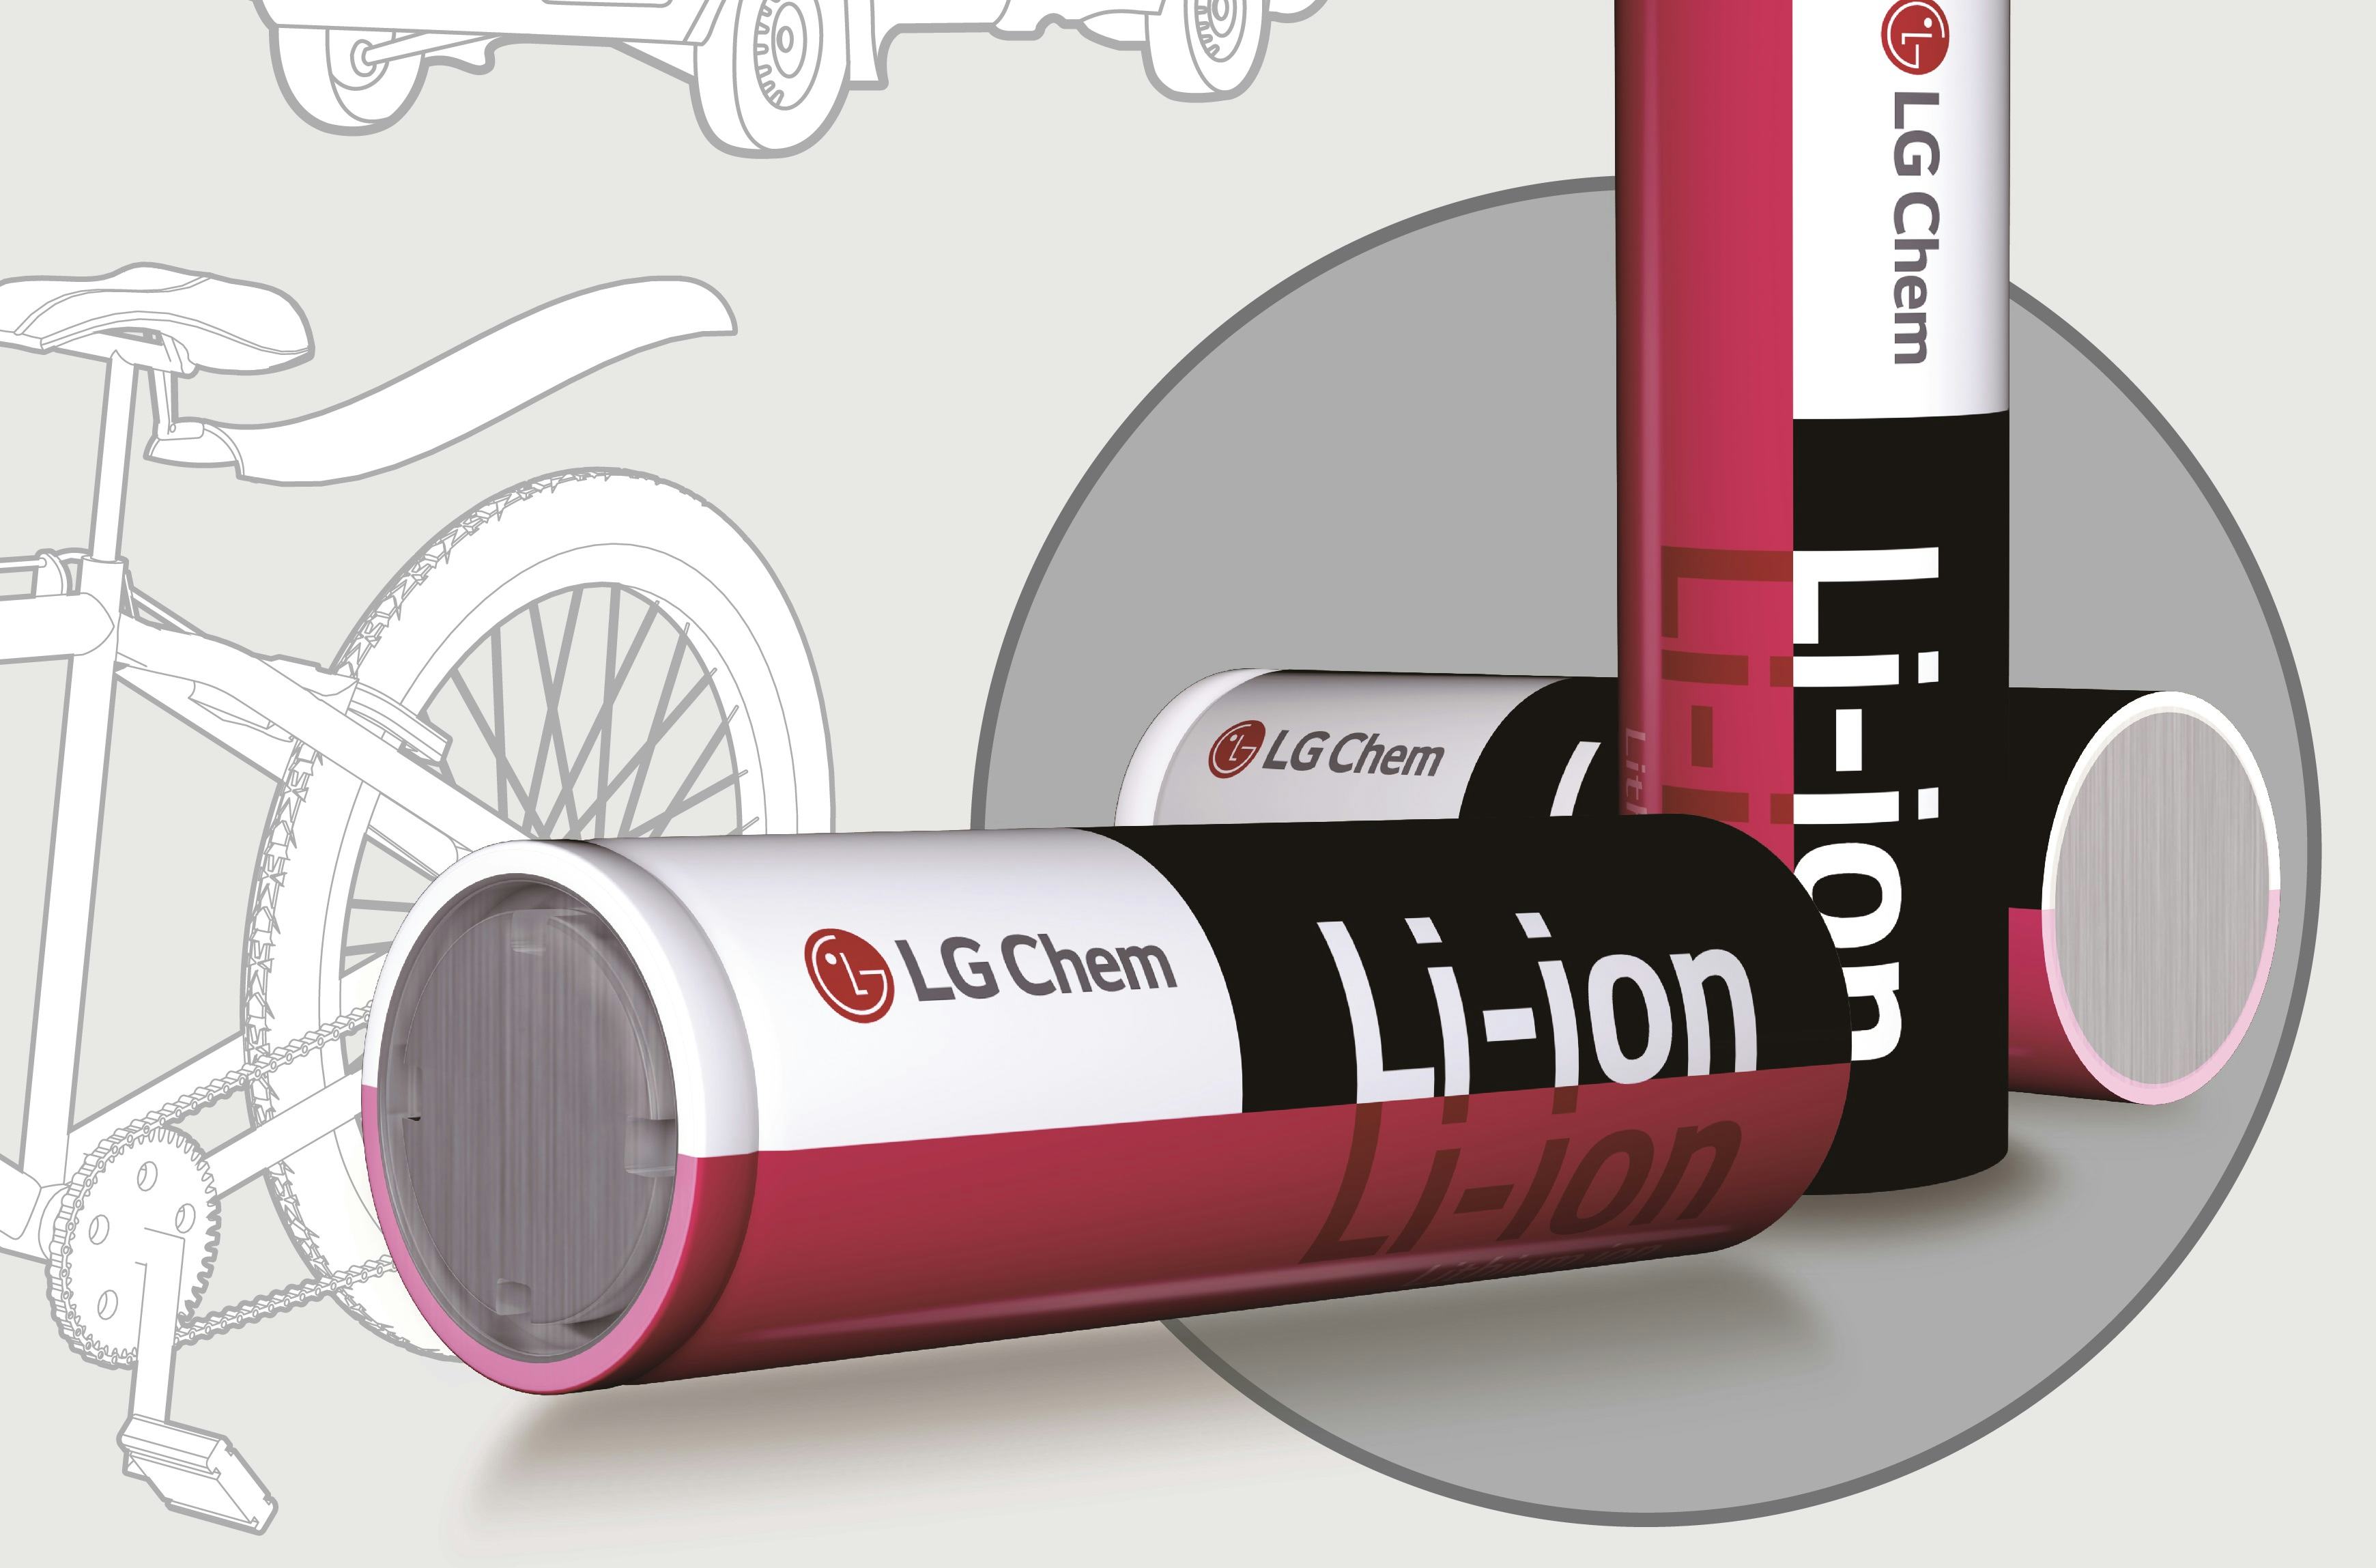 Agreement between BMZ and LG Chem is for long term supply of hundreds of millions of LG’s Li-Ion cells up to end of 2022. – Photo LG Chem